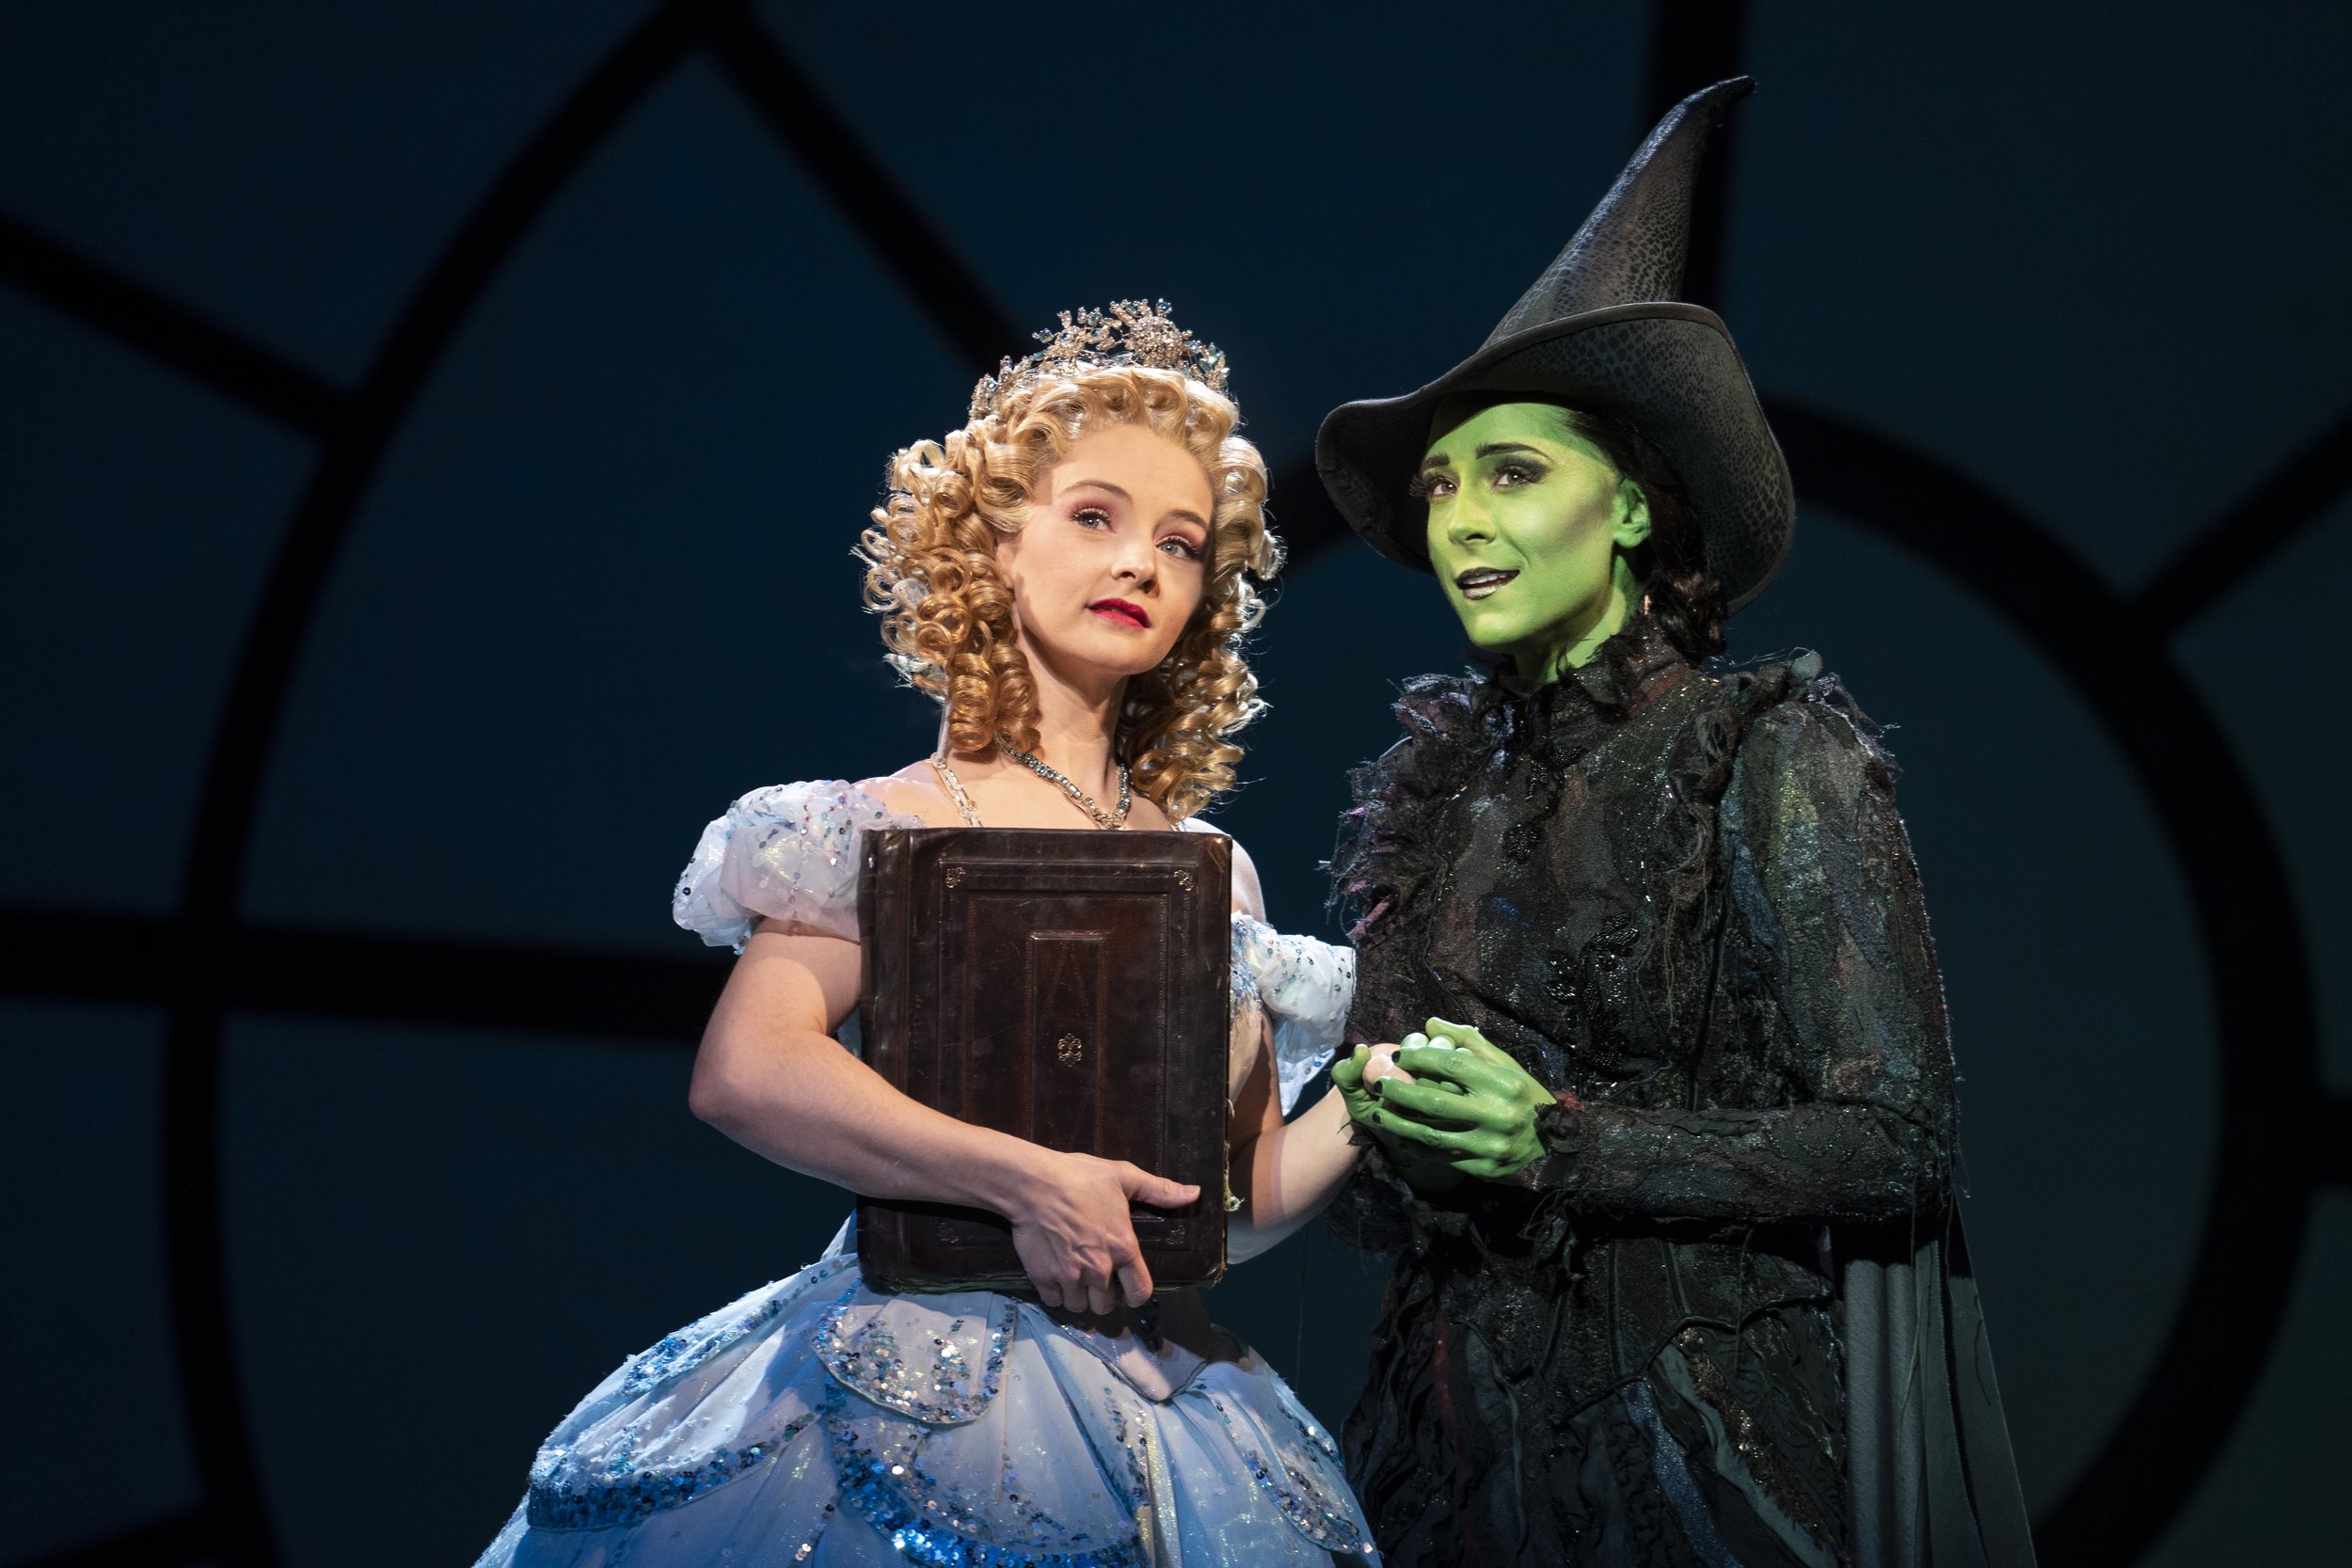 Jennafer Newberry as Glinda and Lissa deGuzman as Elphaba in the National Tour of WICKED, photo by Joan Marcus - 0228r.jpg